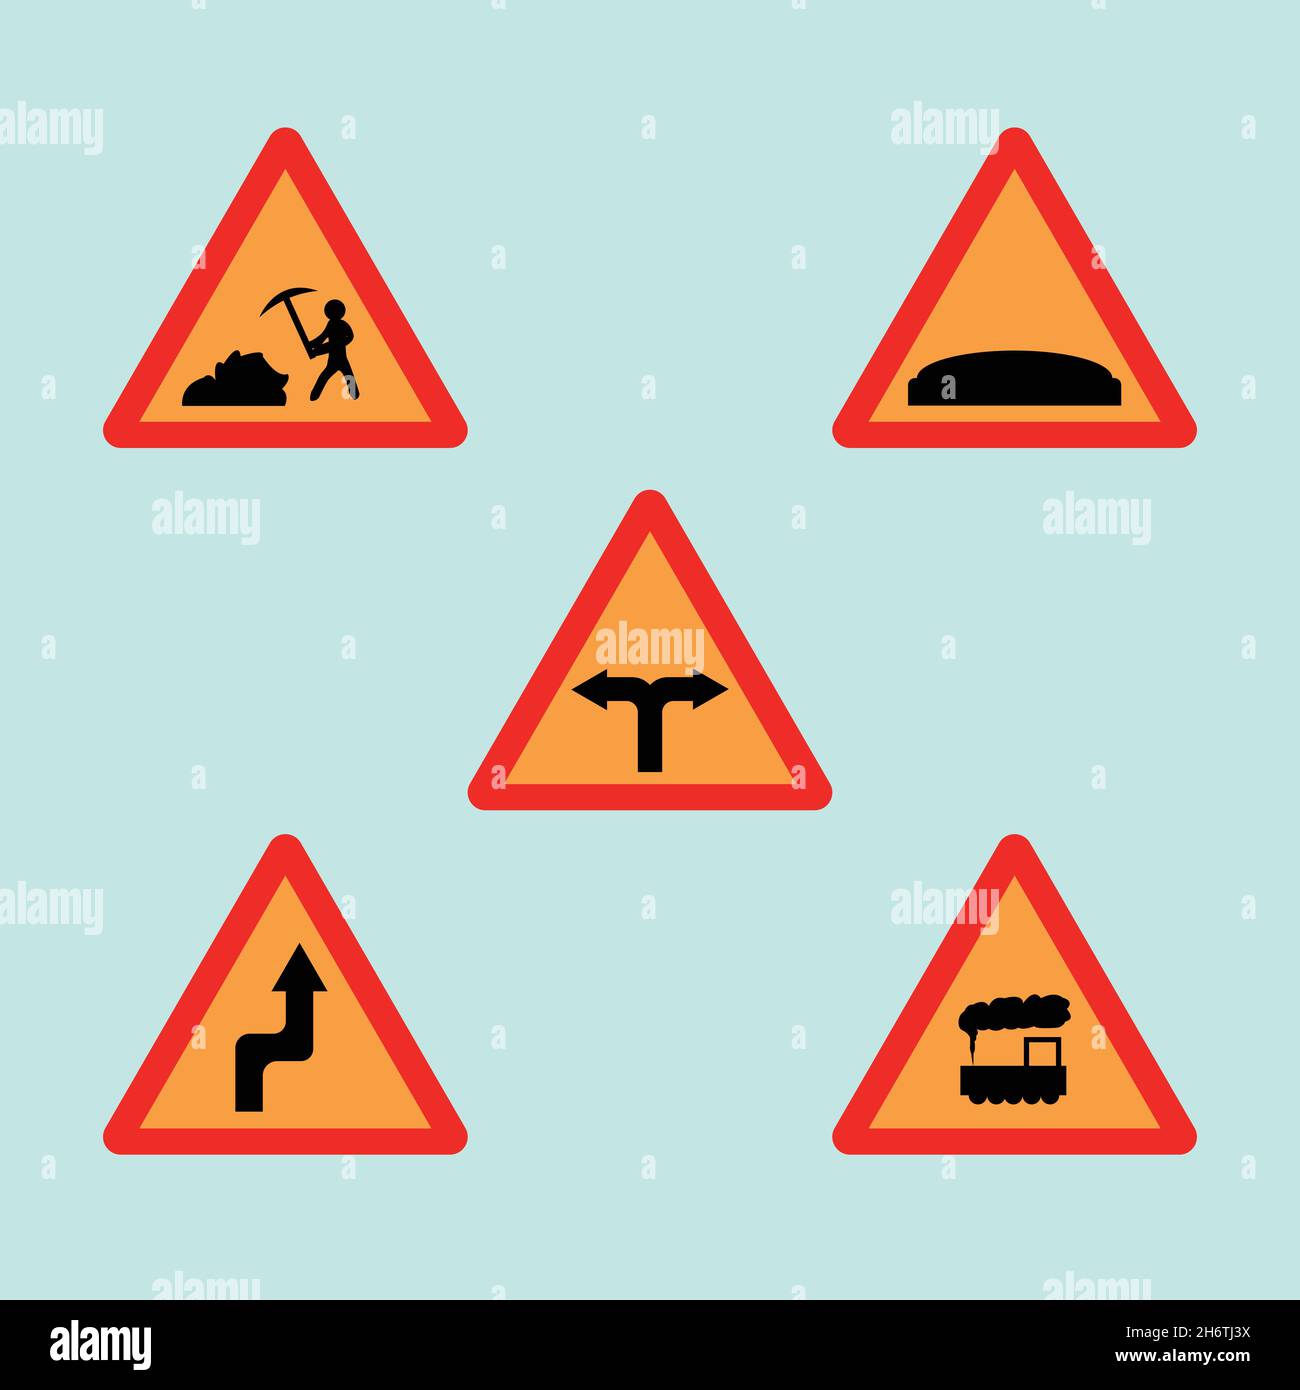 It is a notification symbol of various shapes. It is mainly used to signal danger on roads. Stock Vector